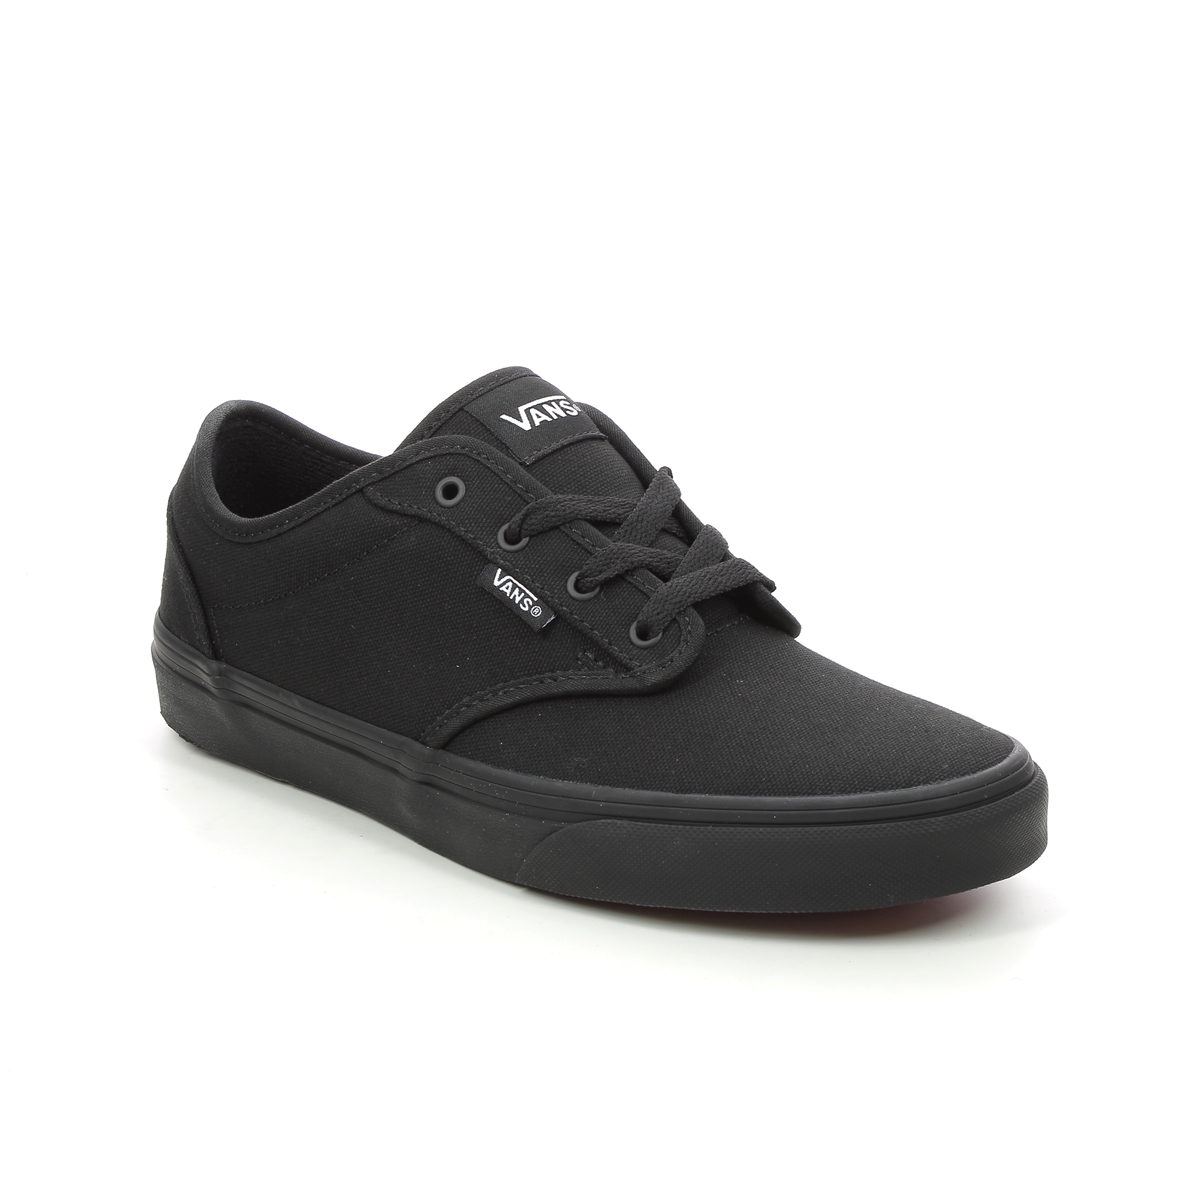 Vans Atwood Youth Black Kids Boys Trainers VN000KI51-861 in a Plain Canvas in Size 6